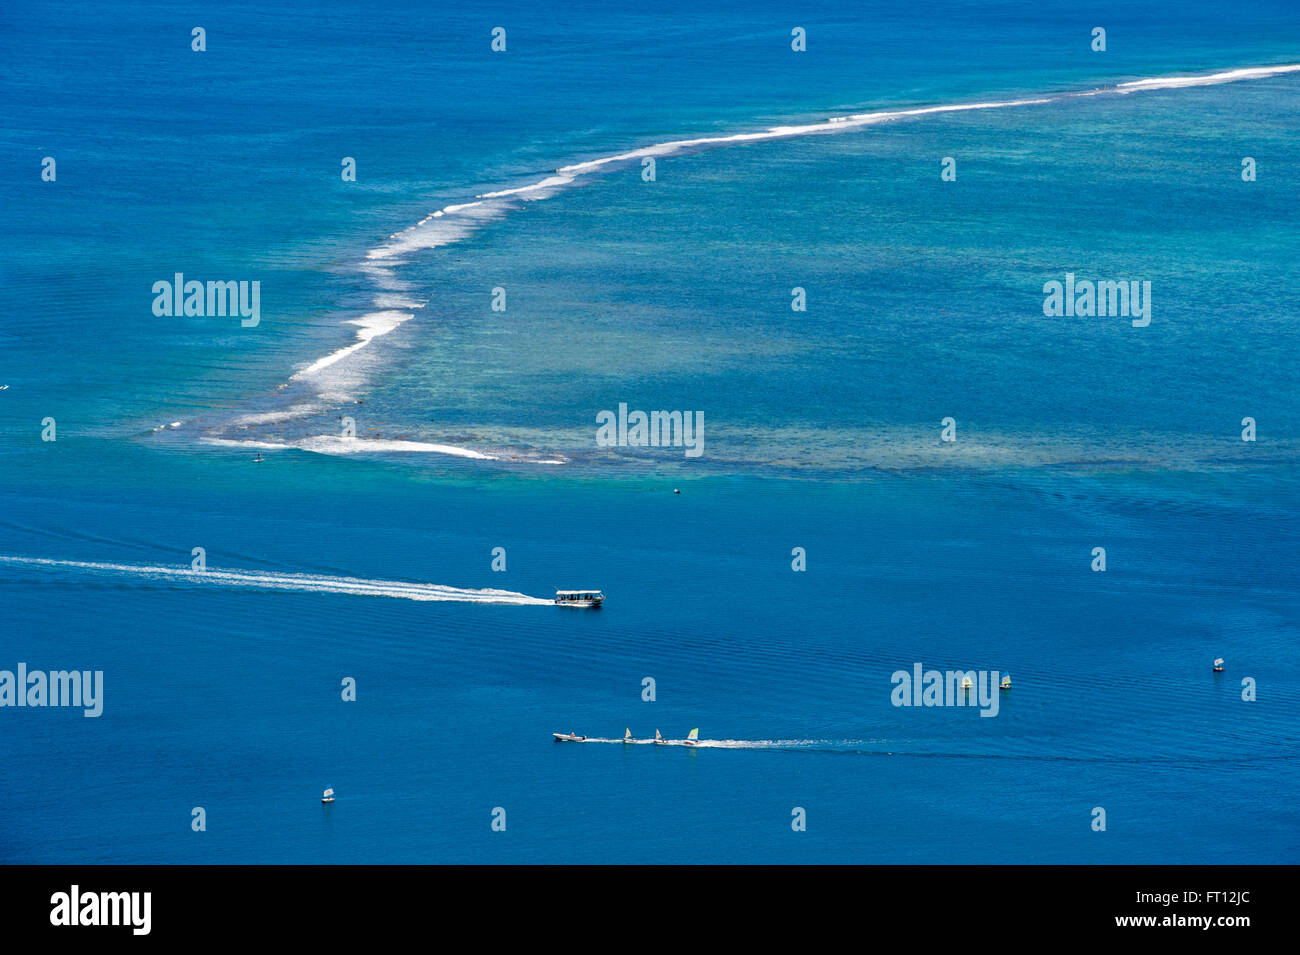 People enjoying watersports along a reef near Cook's Bay, Moorea, French Polynesia, South Pacific Stock Photo